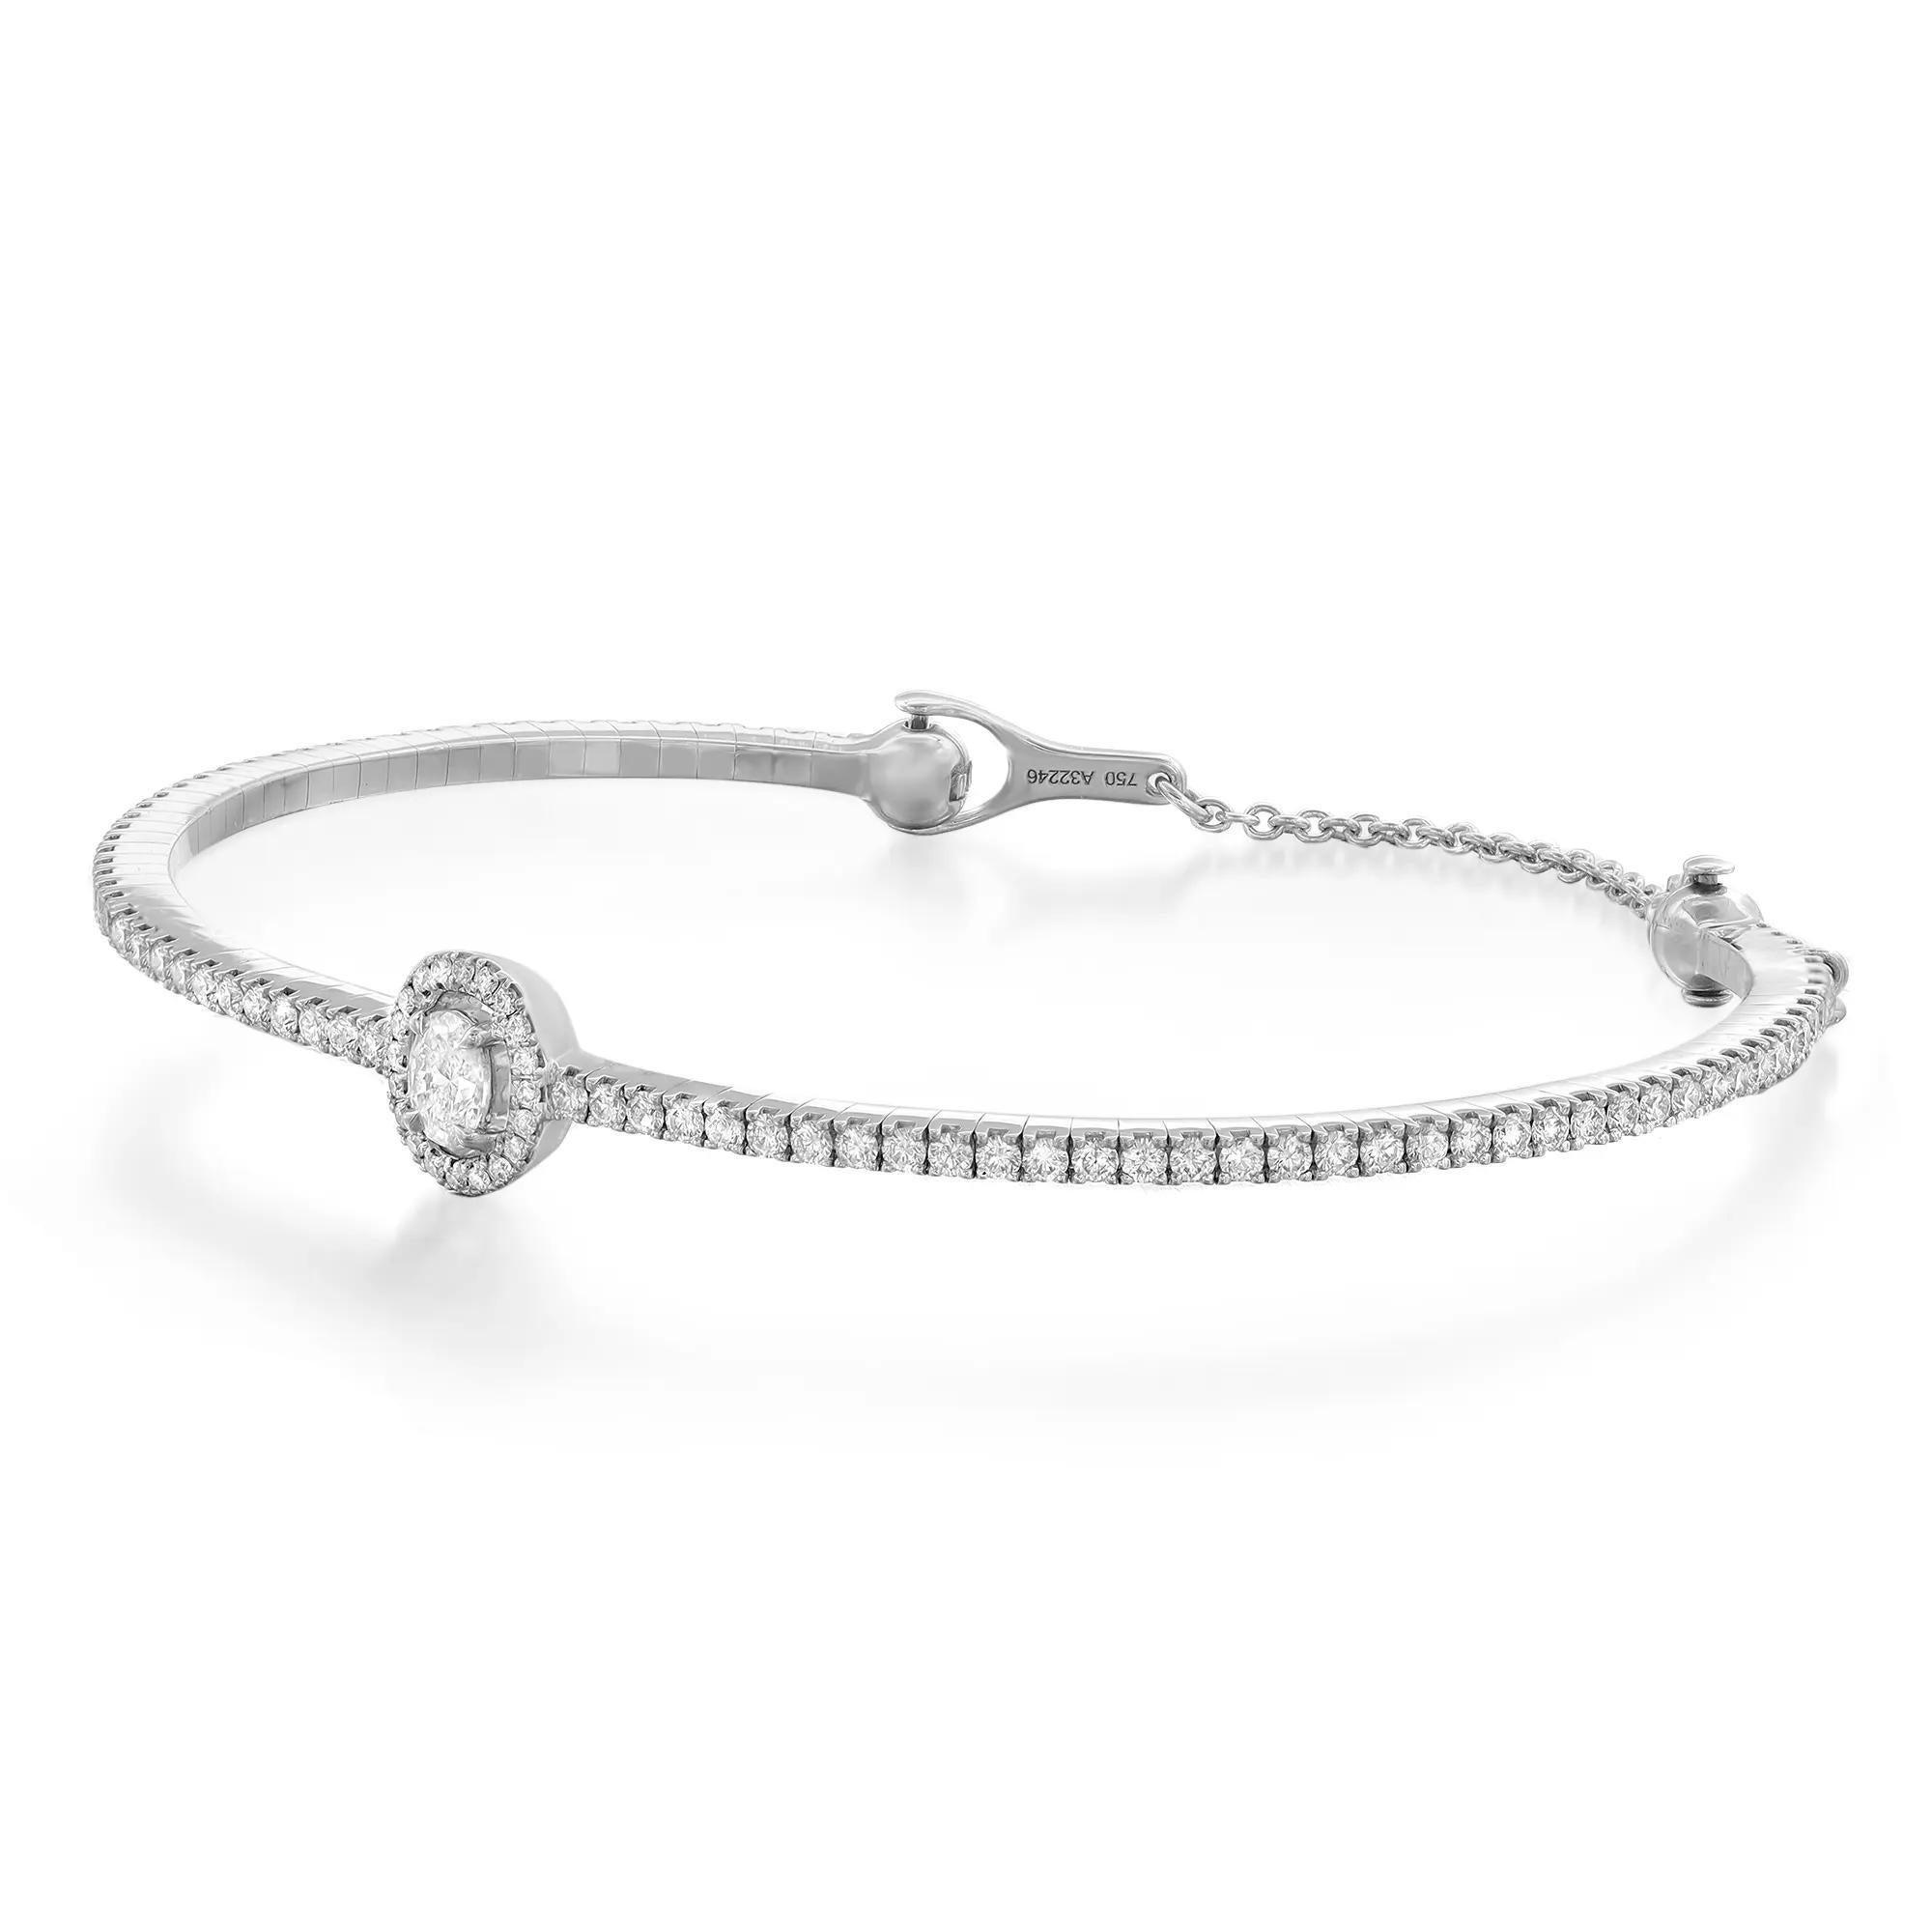 Sparkle all way with this beautiful Messika Skinny Glam'Azone diamond bracelet. Crafted in lustrous 18K White Gold. This glamorous bangle bracelet is adorned with a center prong set oval cut diamond and accented with round brilliant cut diamonds all